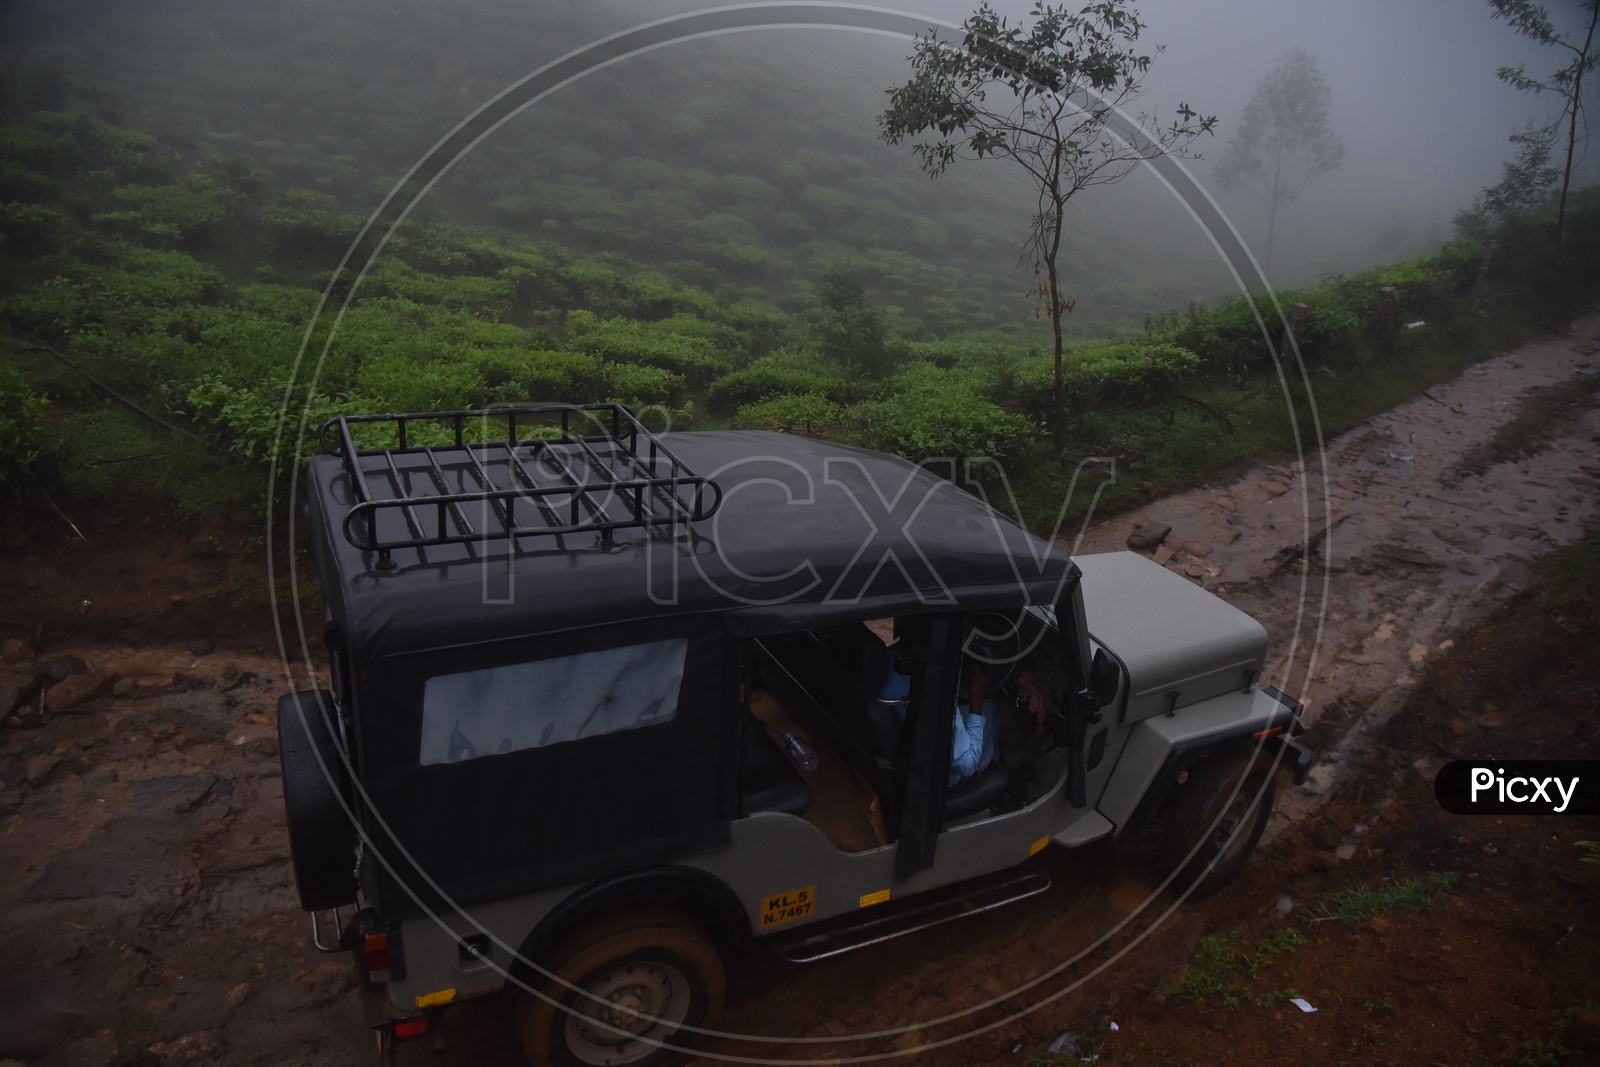 Vehicles Passing on Roads Between tea Plantation in Munnar